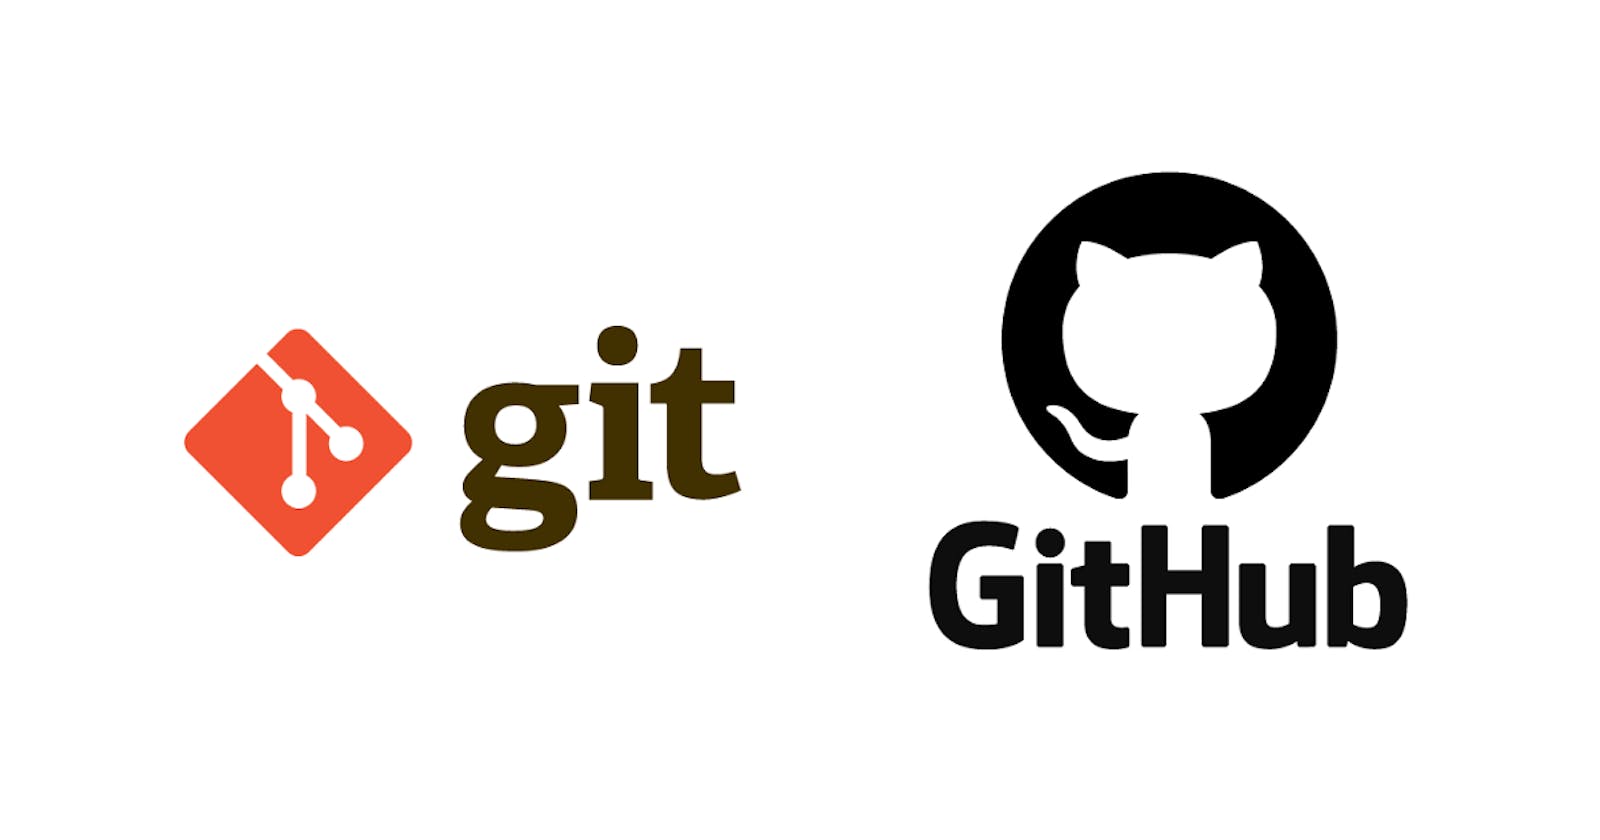 How to create or replace a revoked GitHub access token?